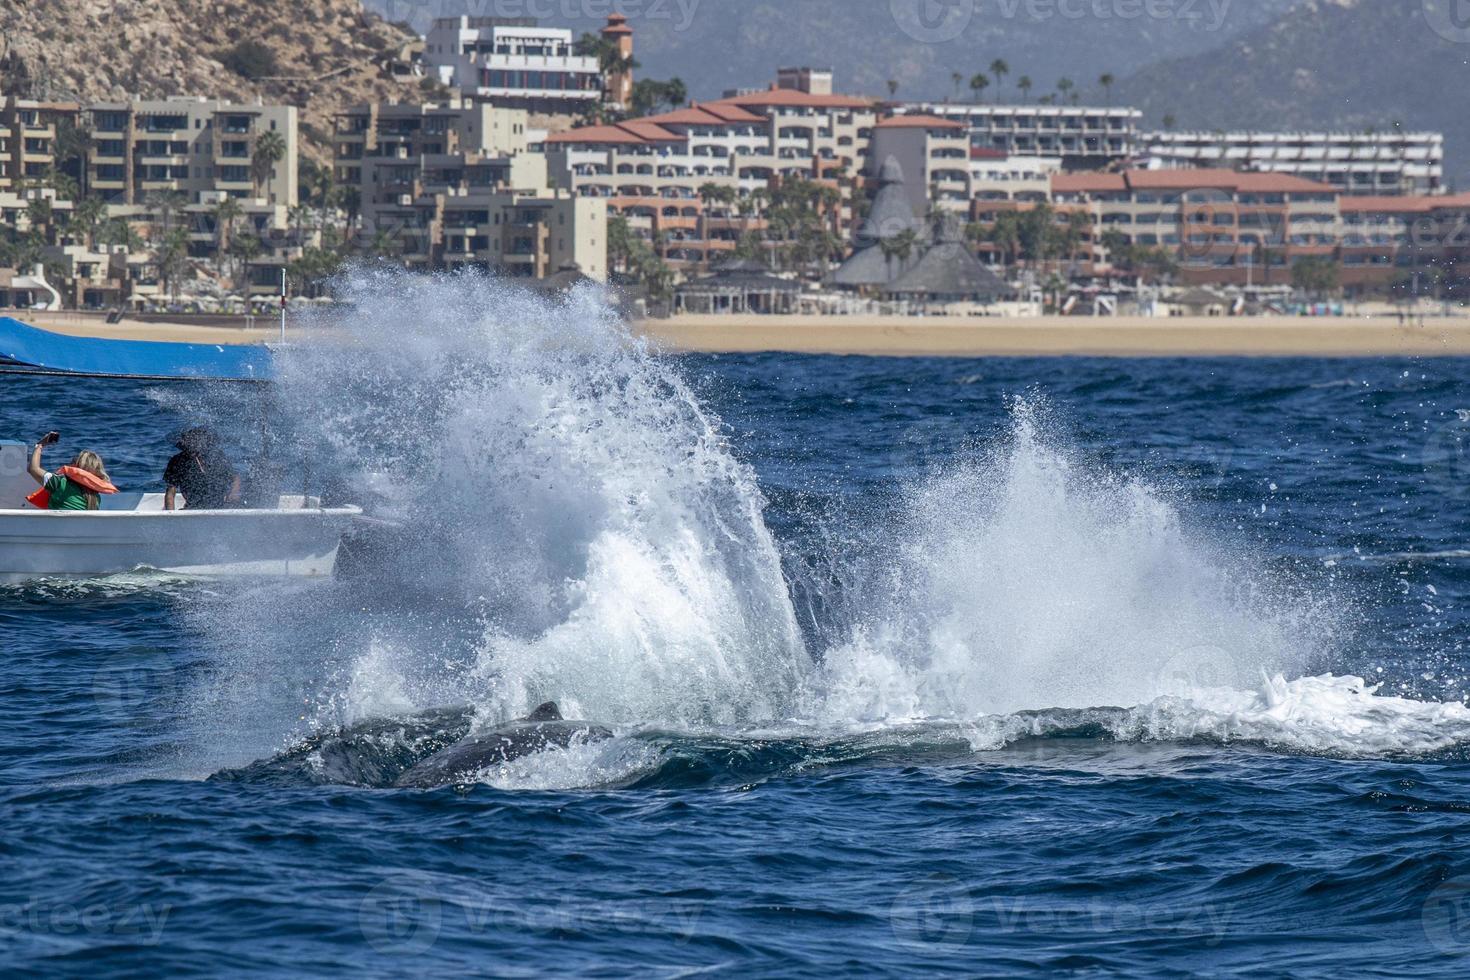 humpback whale tail slapping in front of whale watching boat in cabo san lucas mexico photo